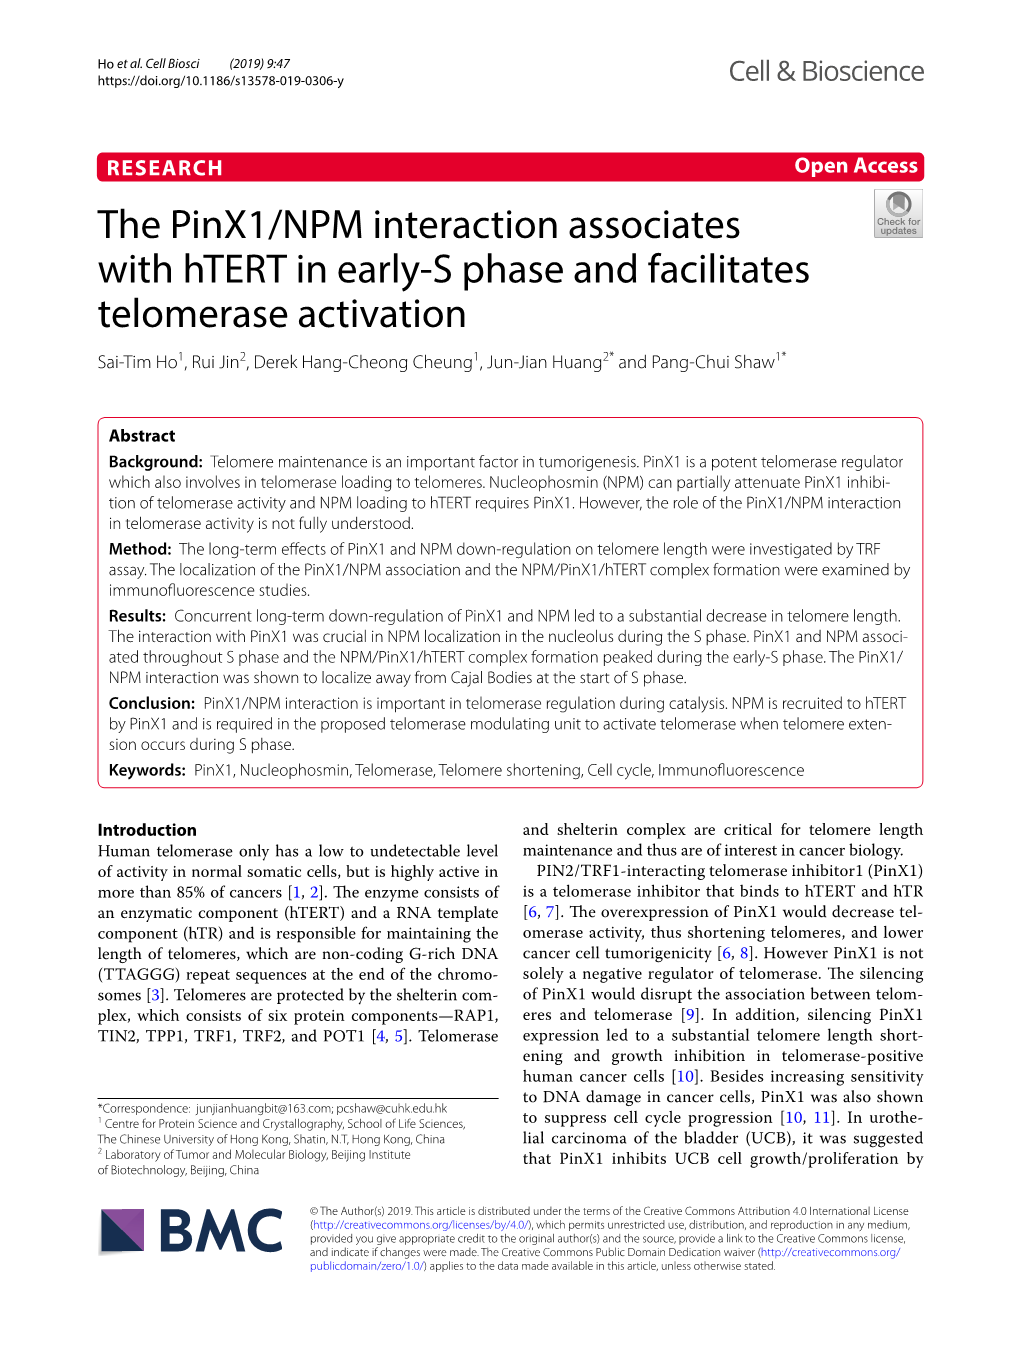 The Pinx1/NPM Interaction Associates with Htert in Early-S Phase And